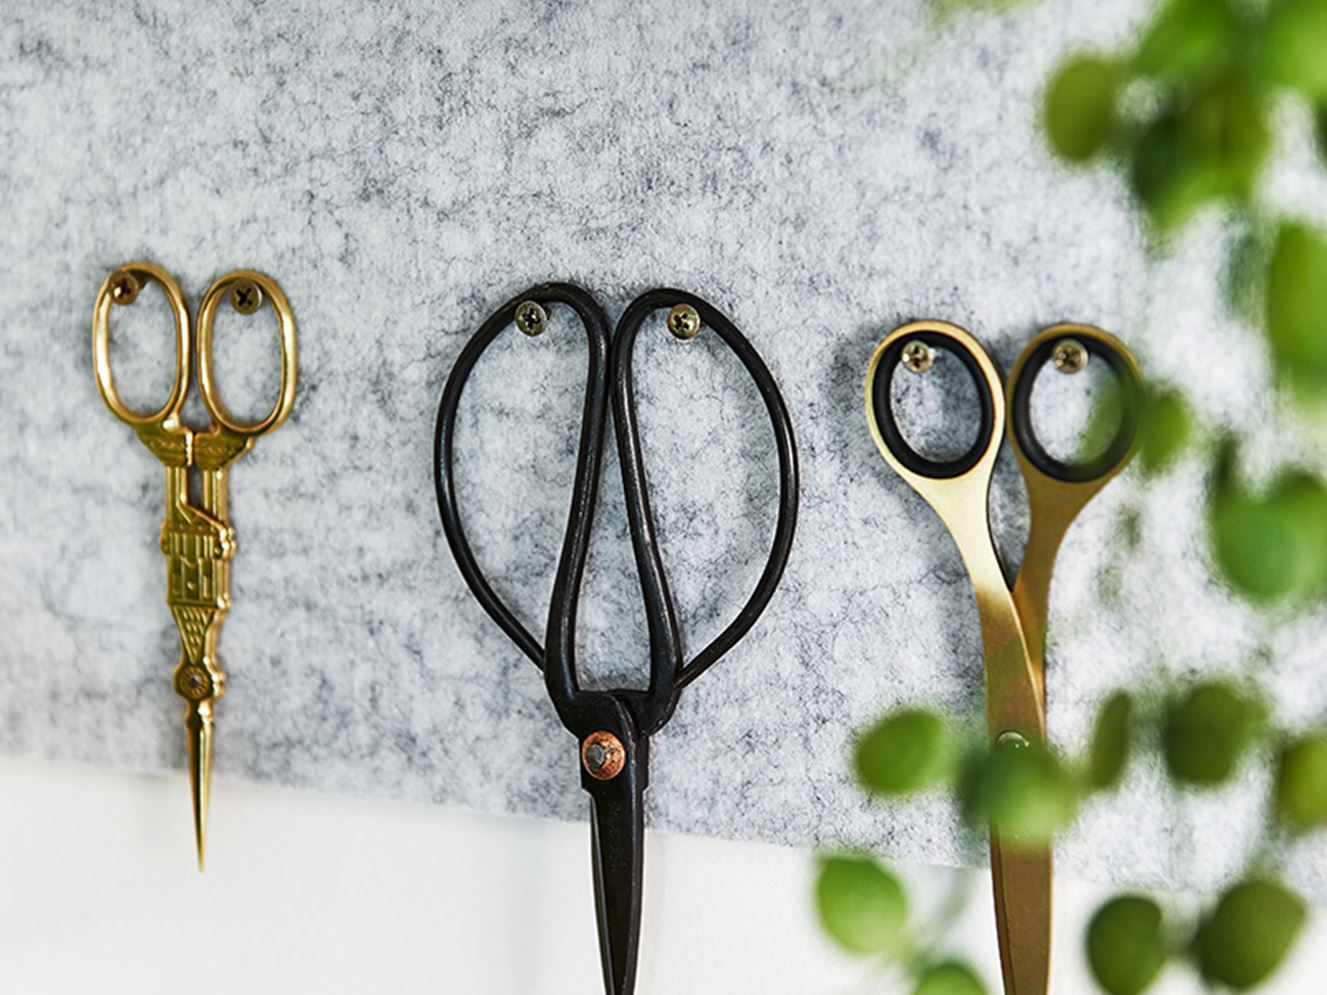 Three alternative scissors used by the design team placed next to each other